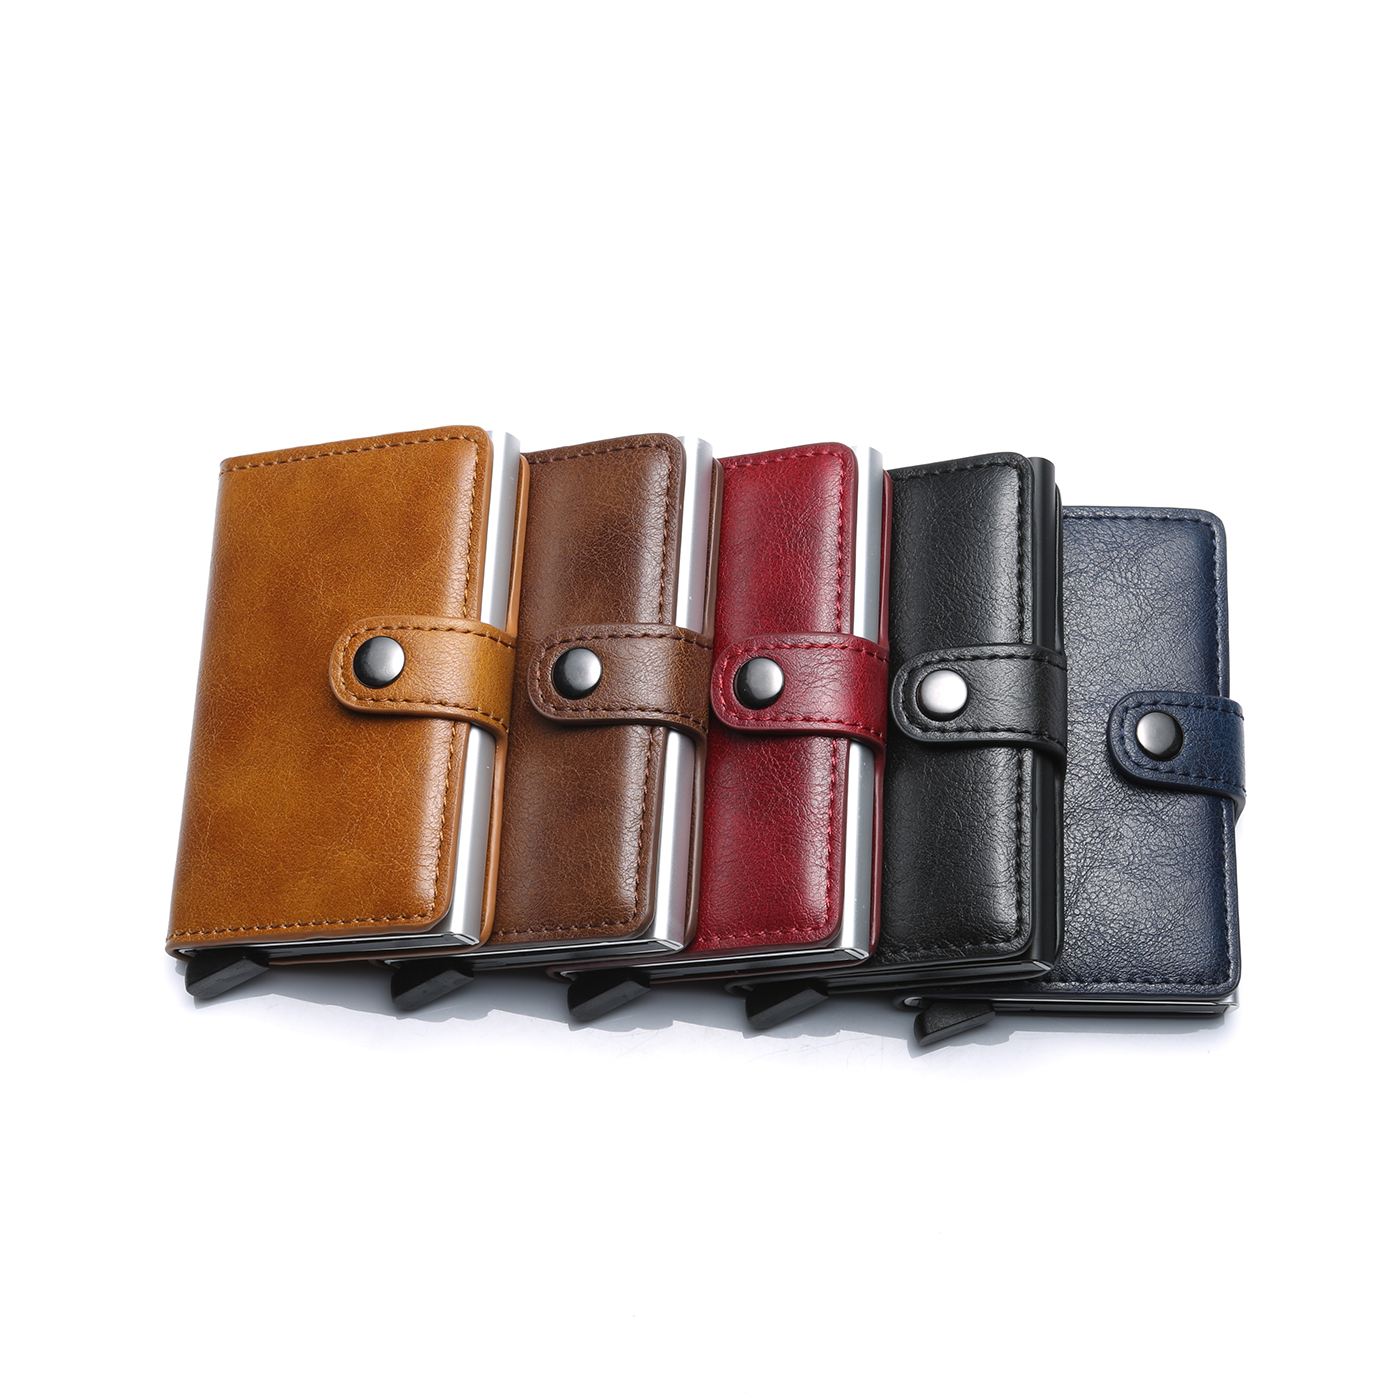 2020 Rfid Genuine Leather Men Wallets Card Holder Slim Thin Smart Magic Wallet Small Short Coin Purse Male Wallet